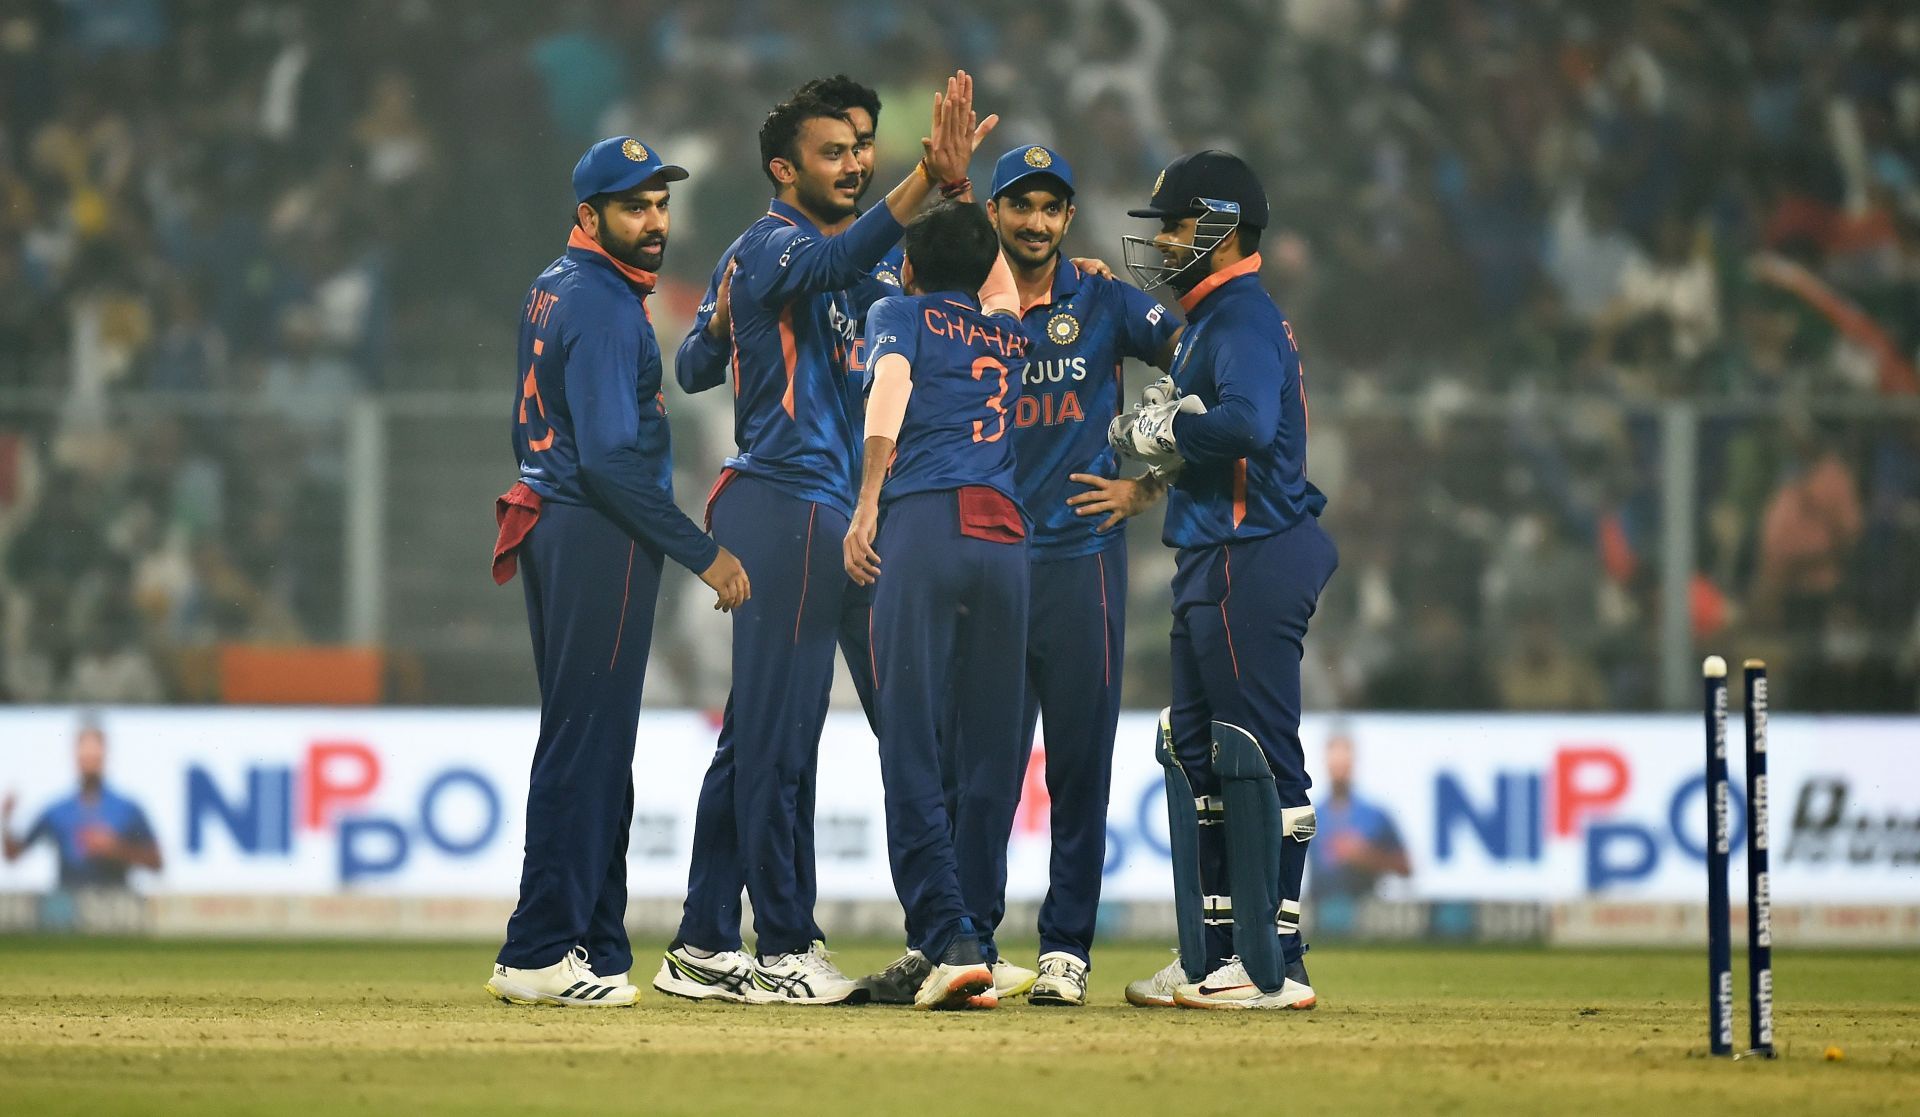 The left-arm spinner celebrates a wicket with teammates. Pic: Getty Images